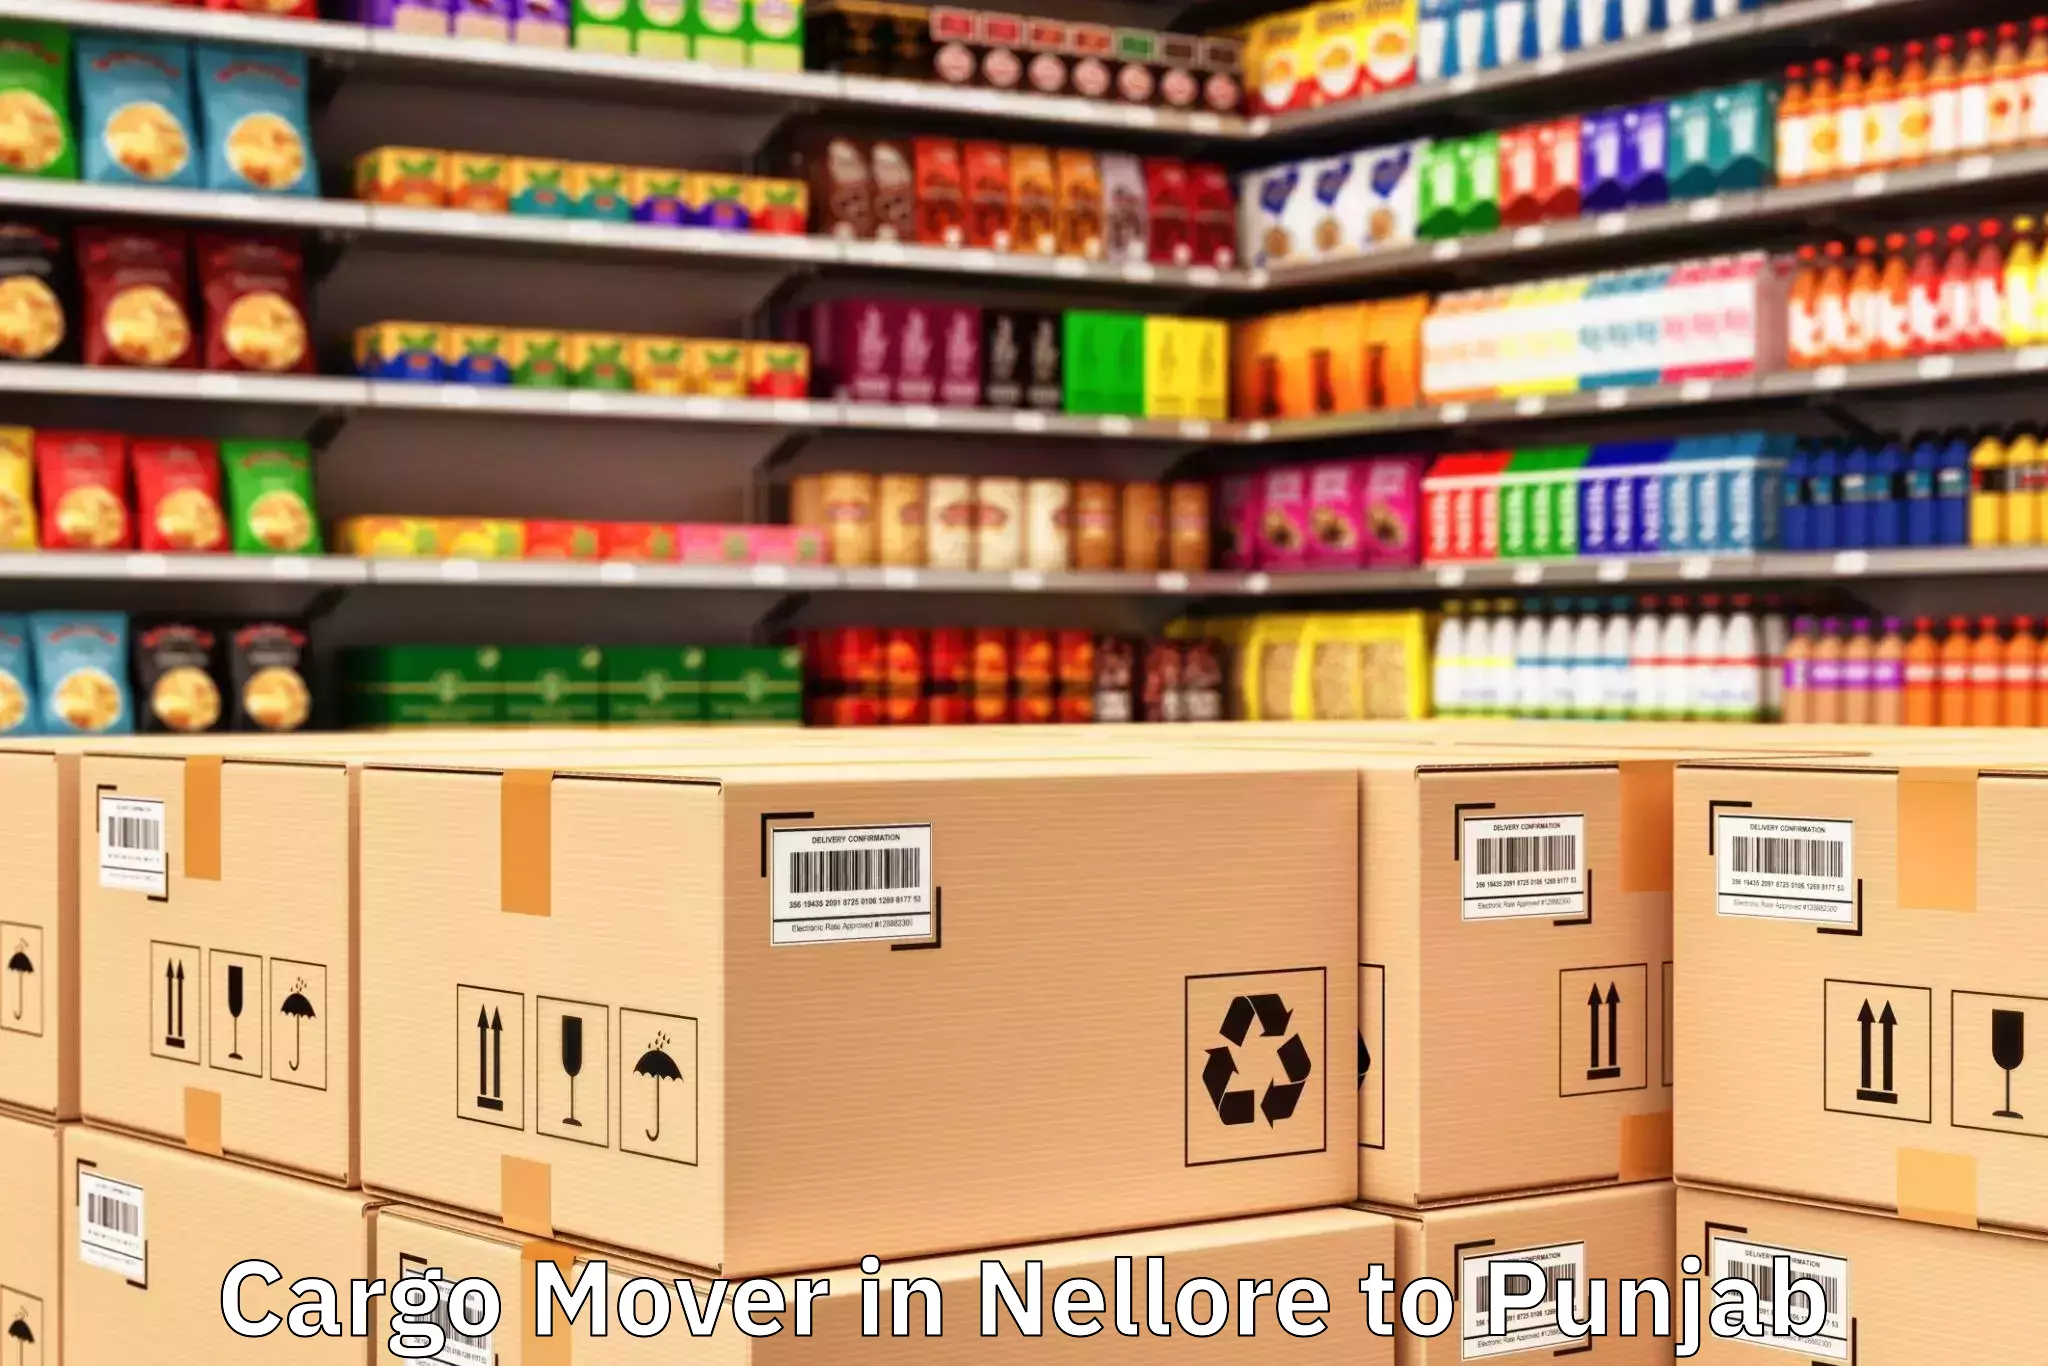 Reliable Nellore to Vr Punjab Mall Cargo Mover